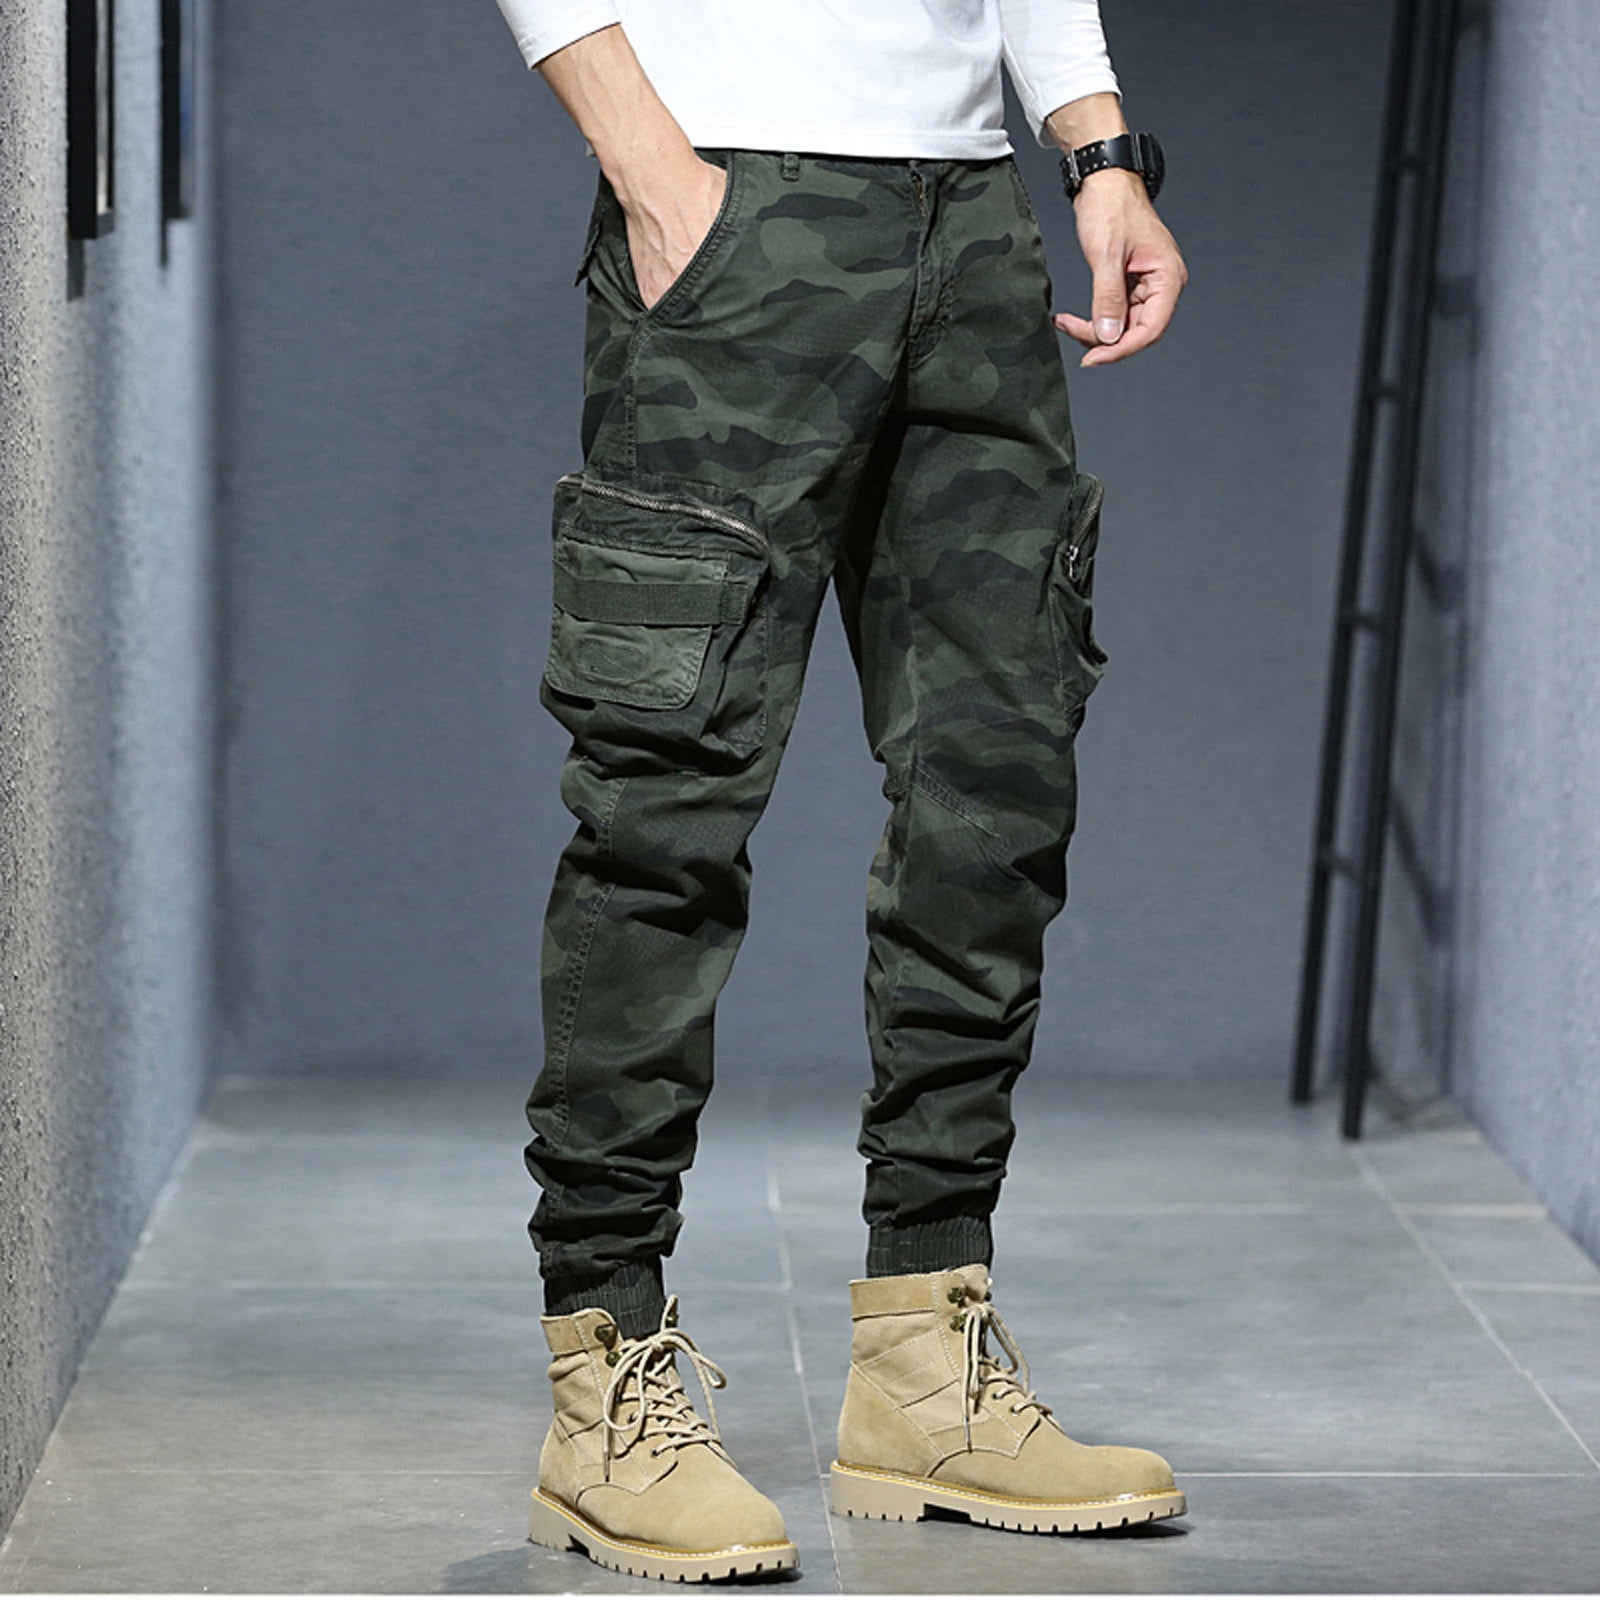 How to Style Cargo Pants - Cargo Pants Outfit Ideas